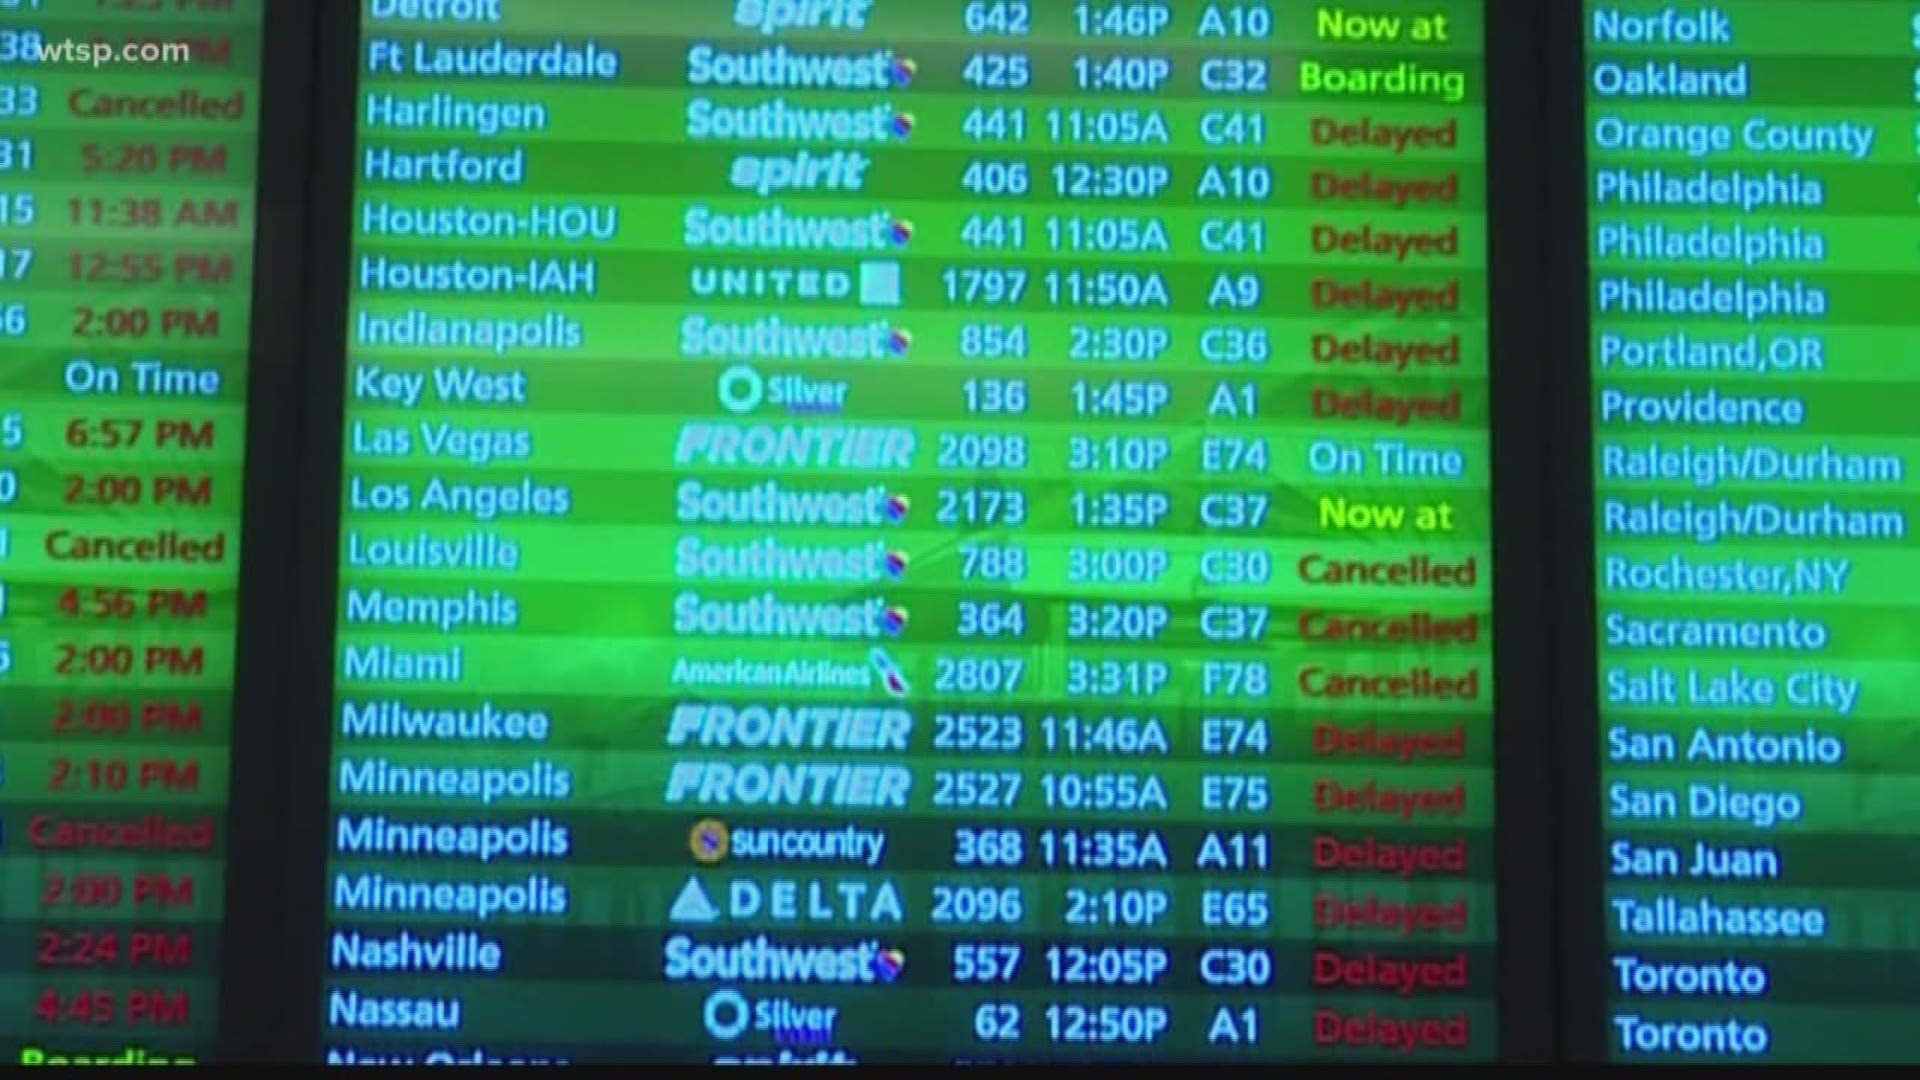 Many travelers were stuck as flights were grounded by the bad weather as Easter weekend travel ramped up.